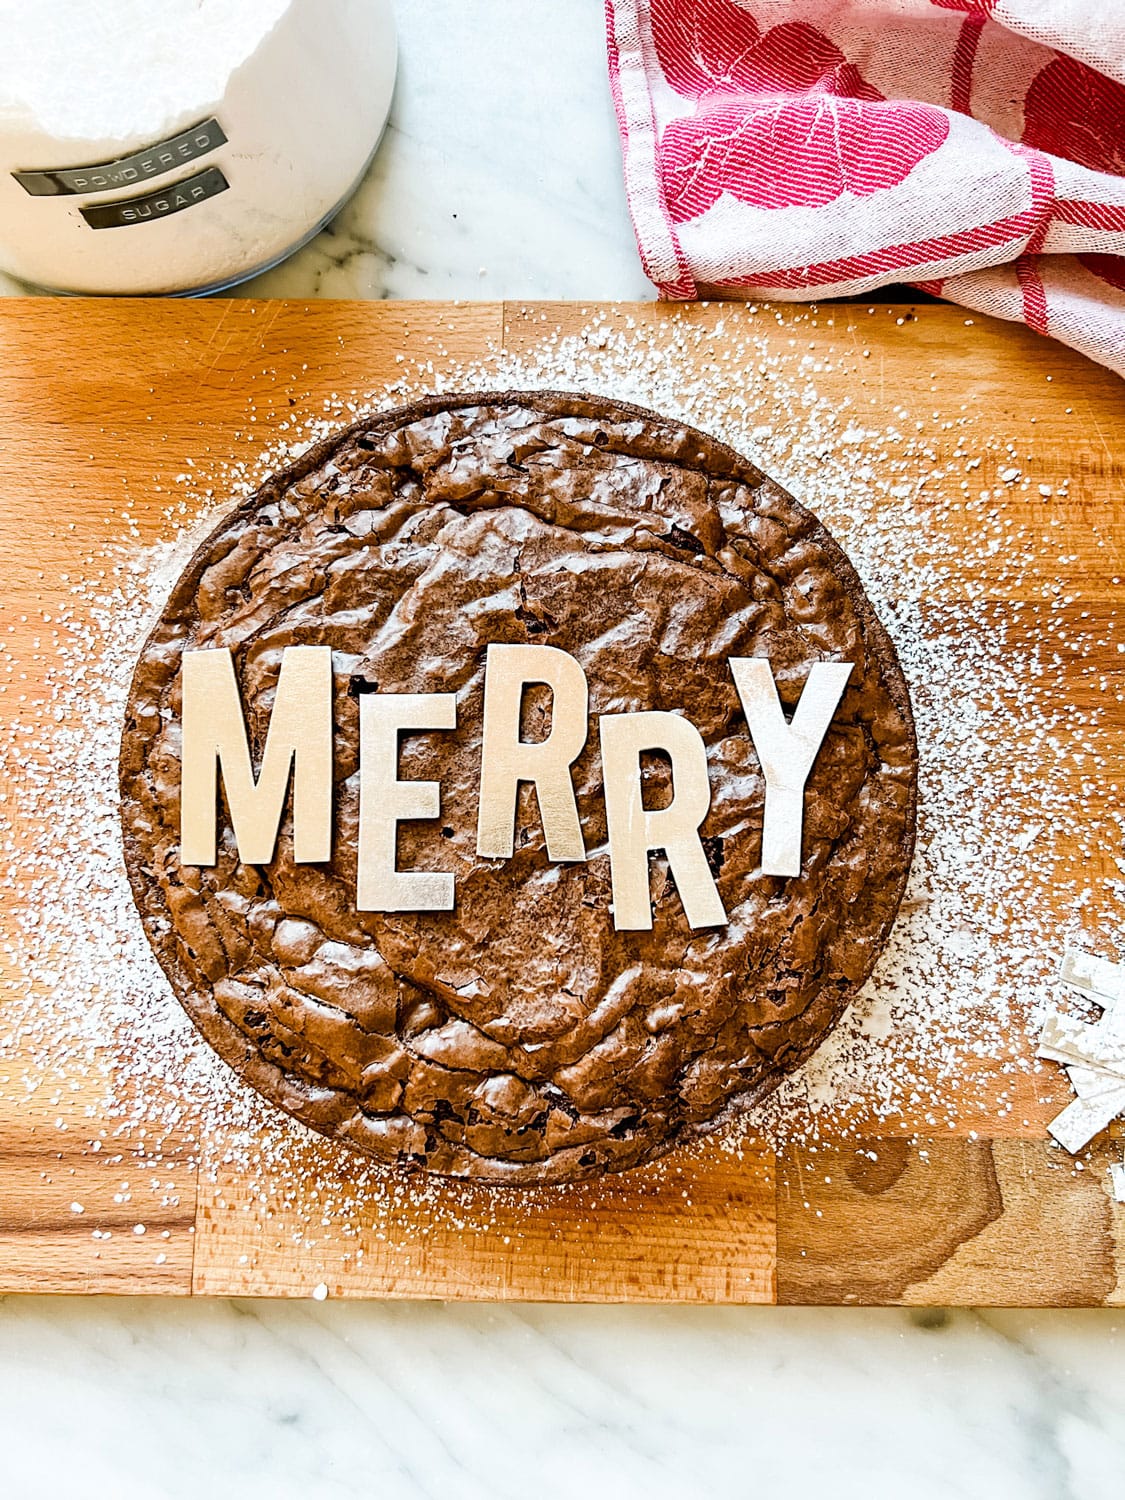 https://mostlovelythings.com/wp-content/uploads/2022/12/brownies-decorated-merry.jpg